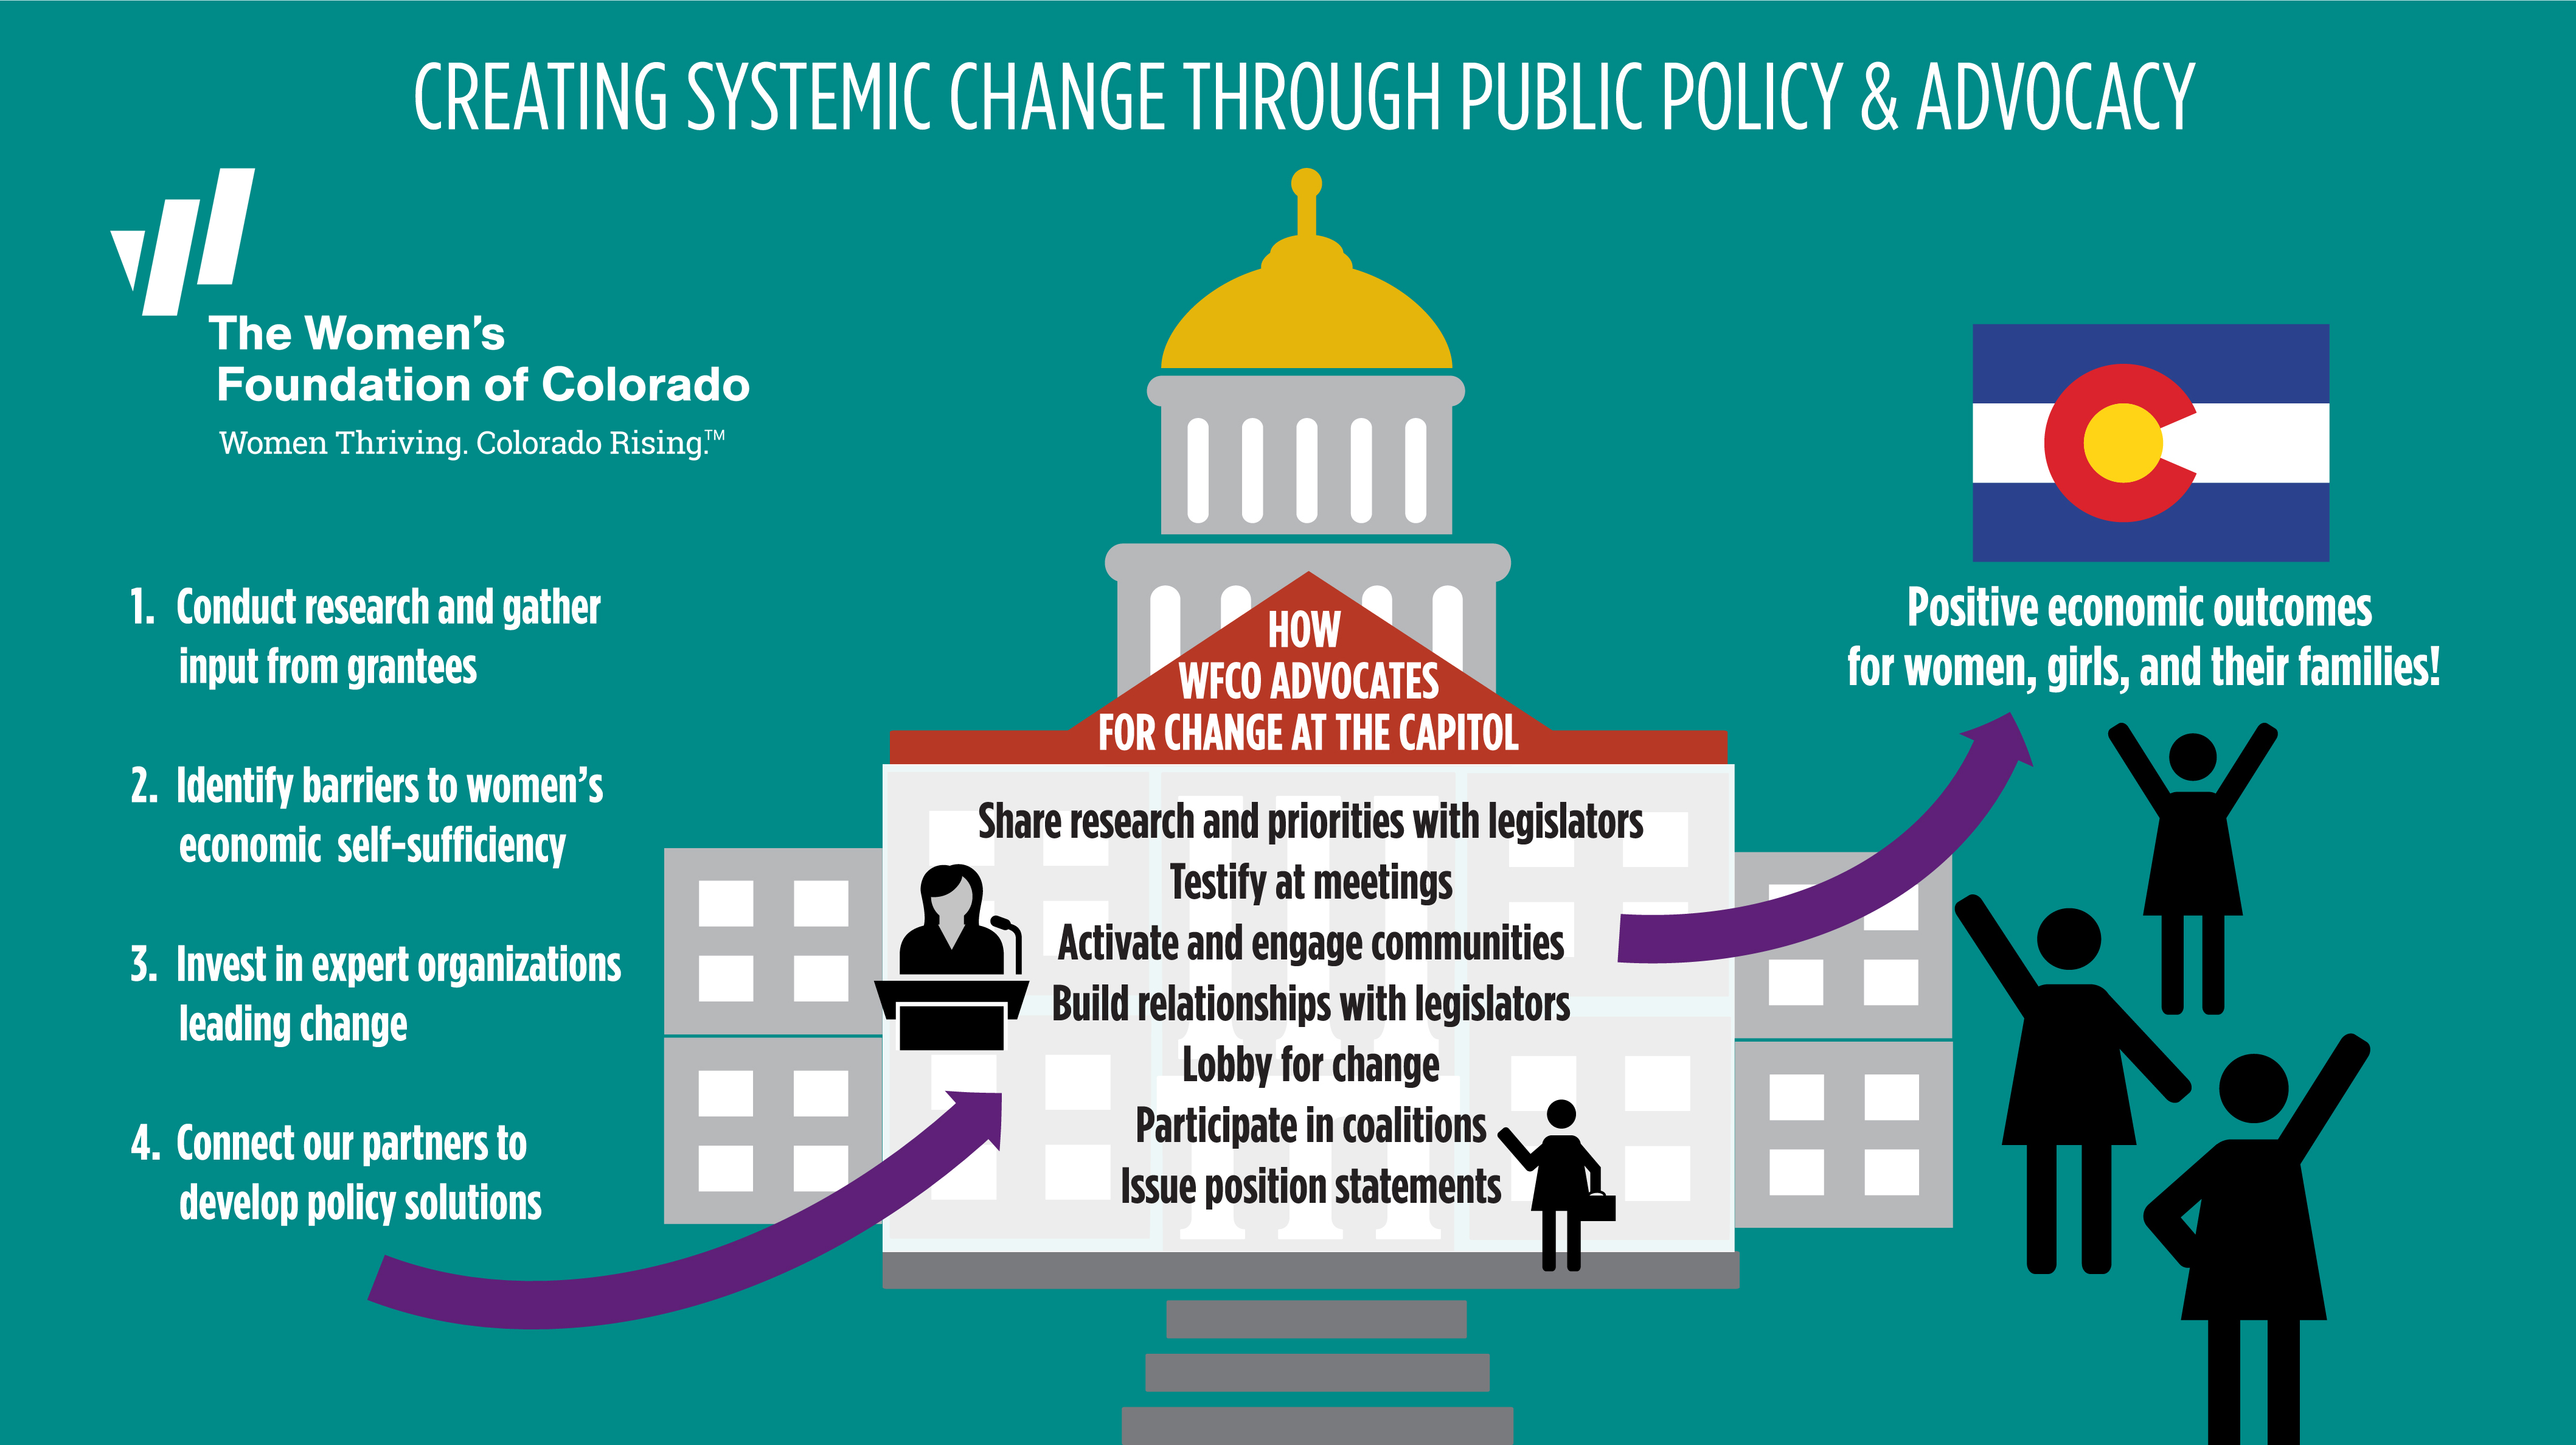 social research on public policy